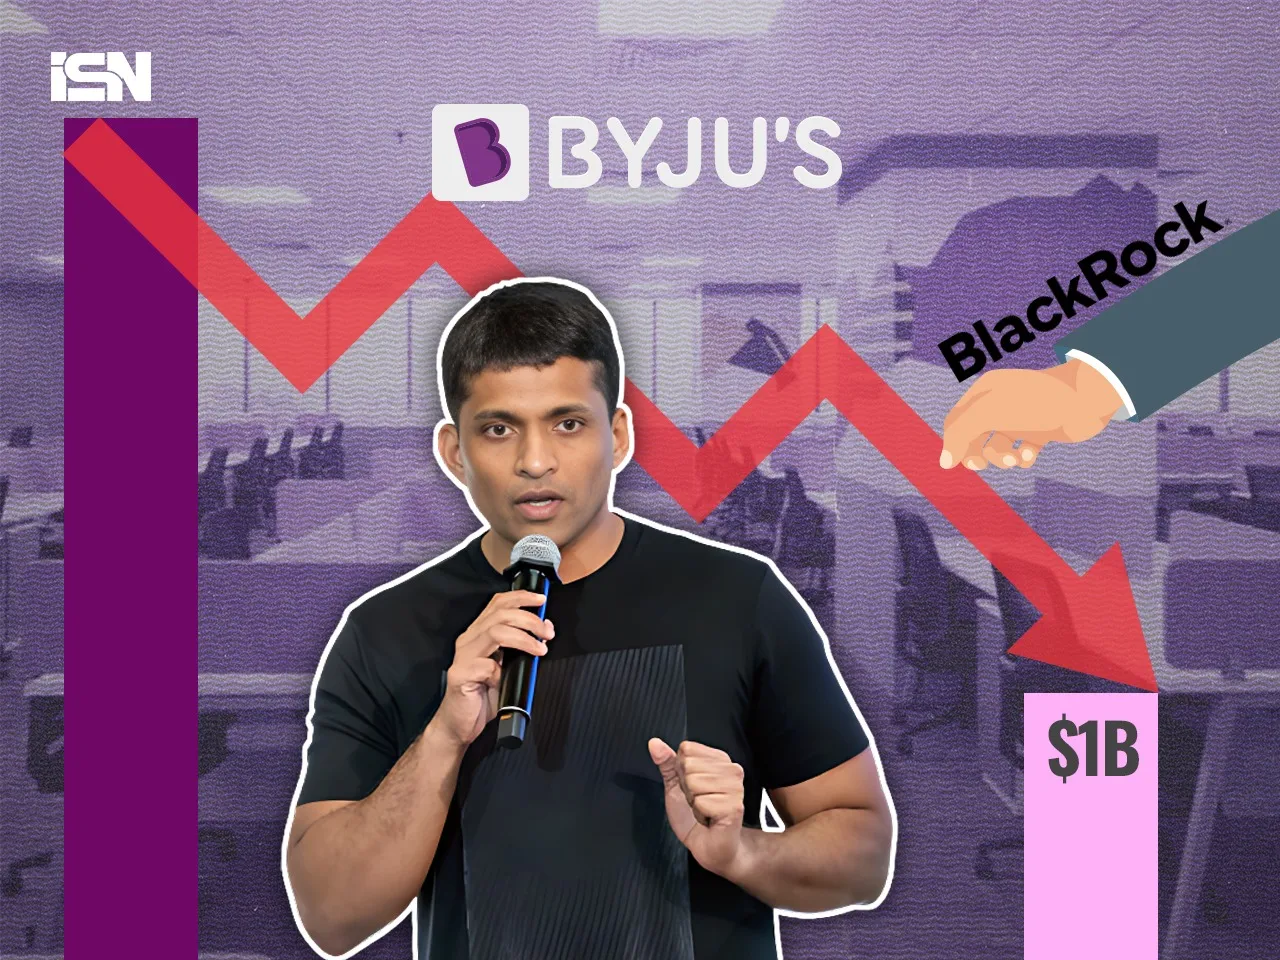 byjus valuation